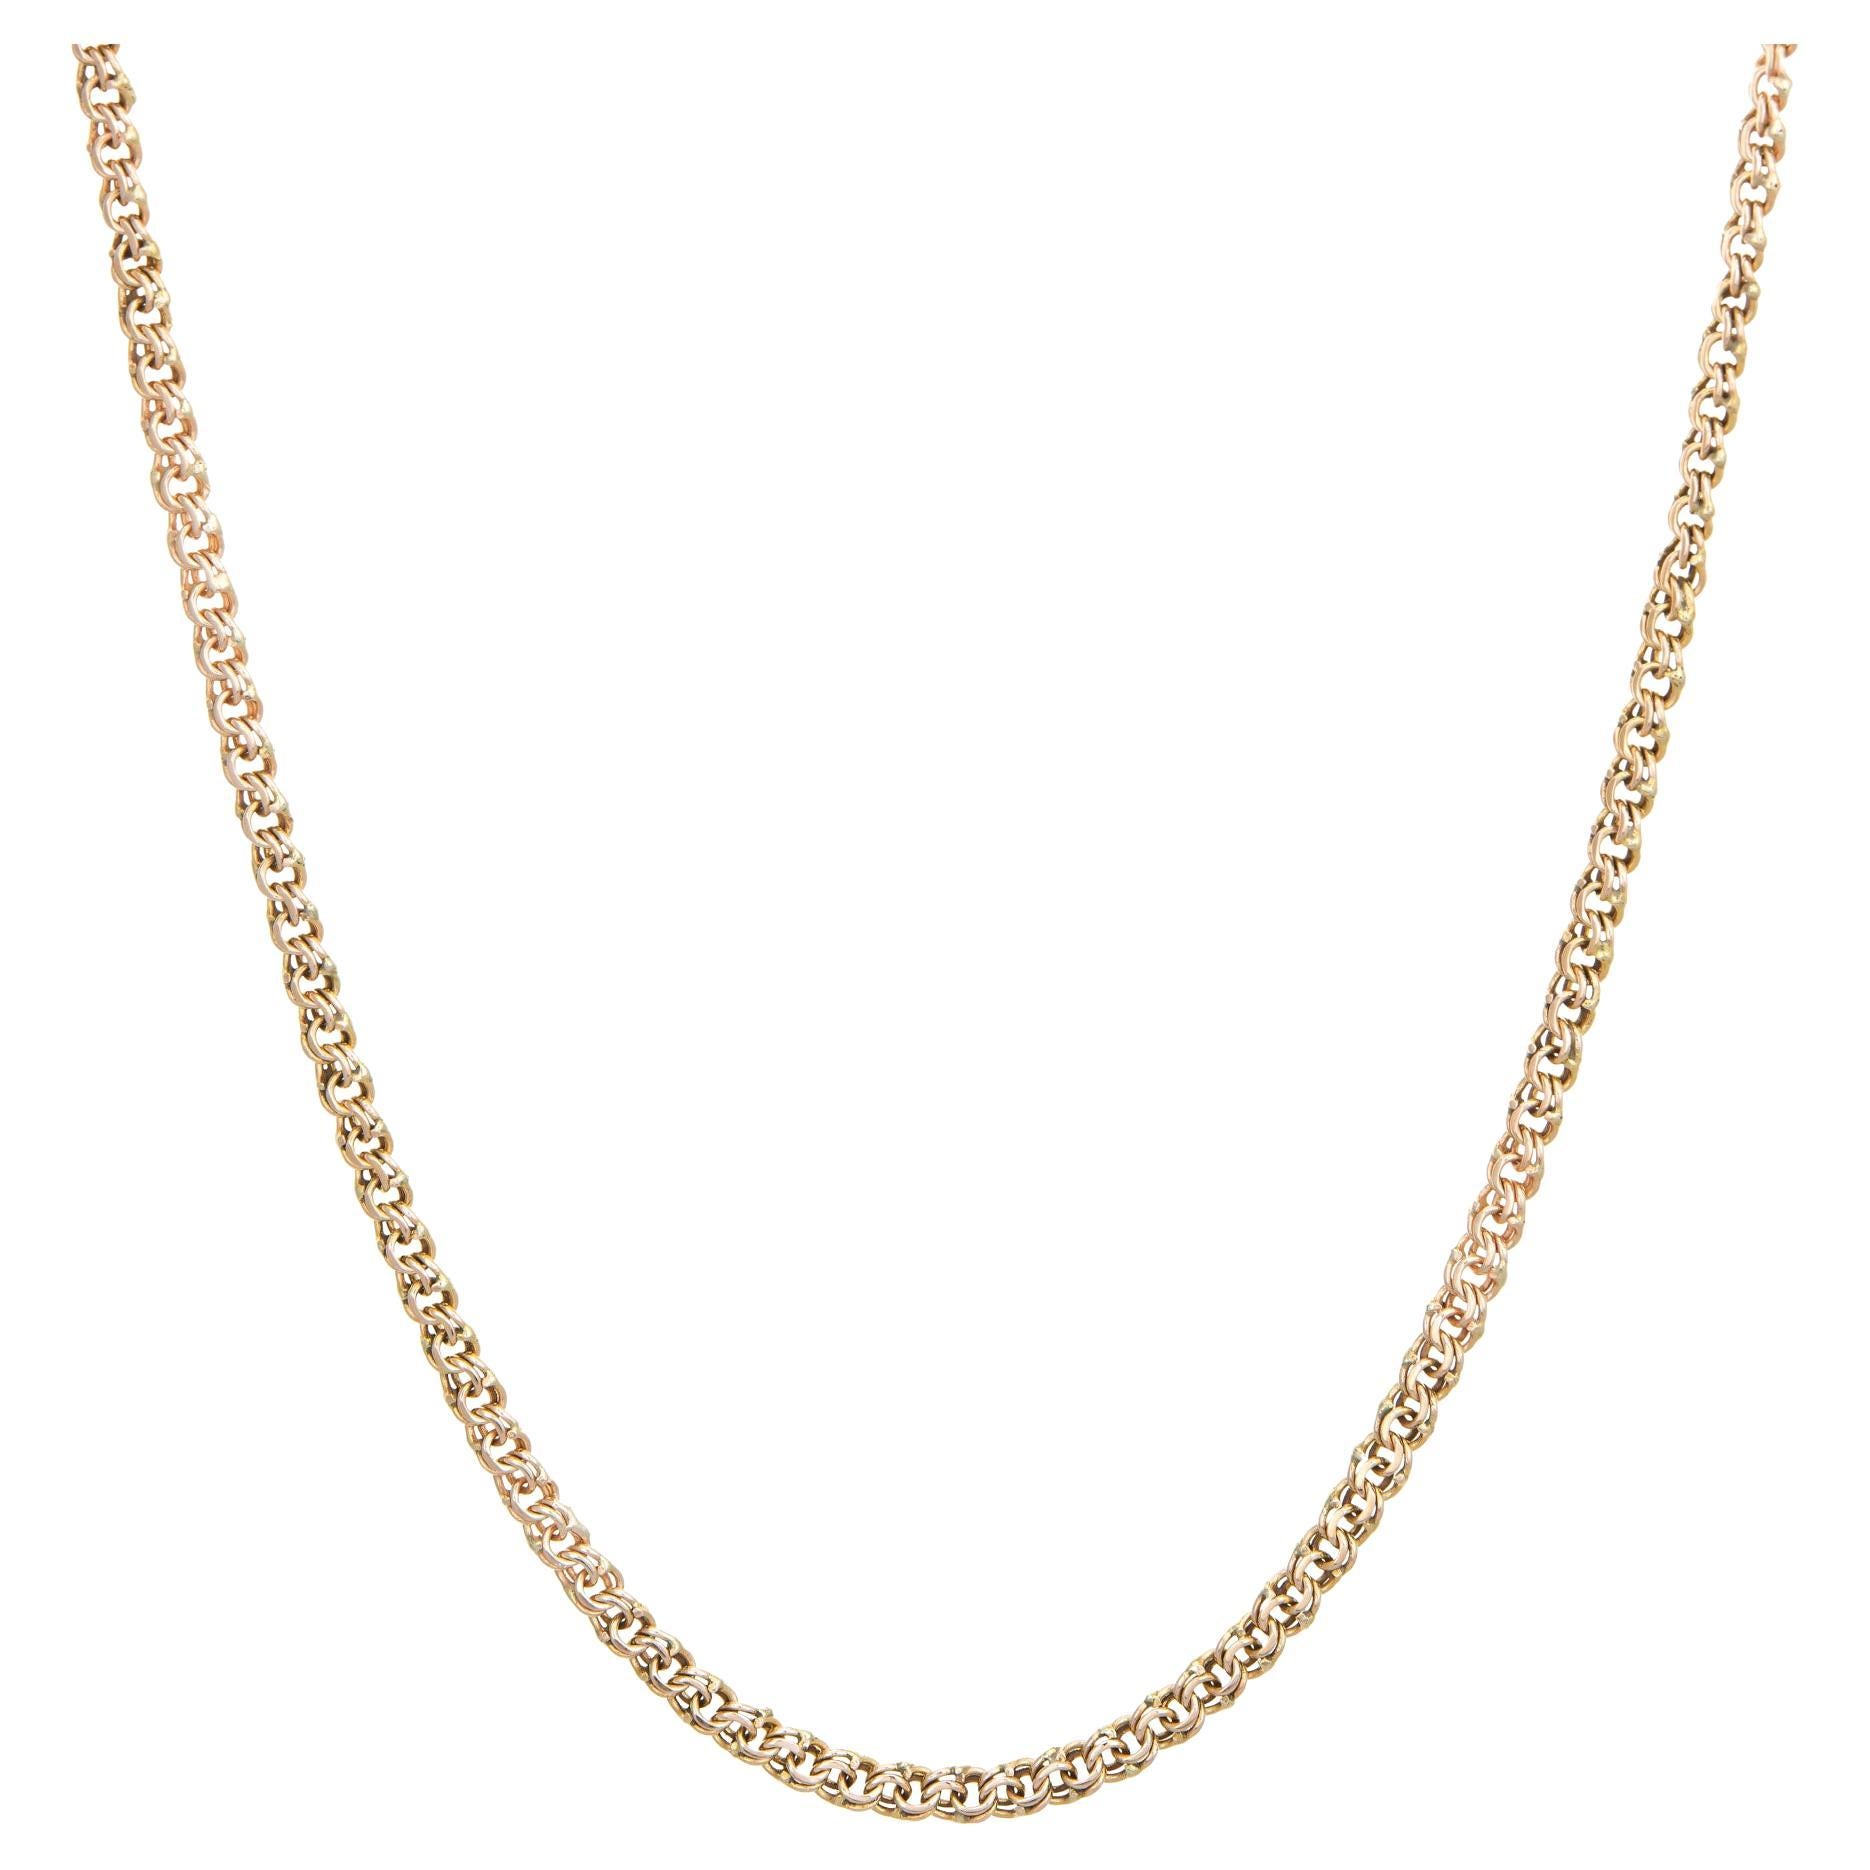 Vintage Chain 10k Yellow Gold Necklace Double Link Estate Jewelry